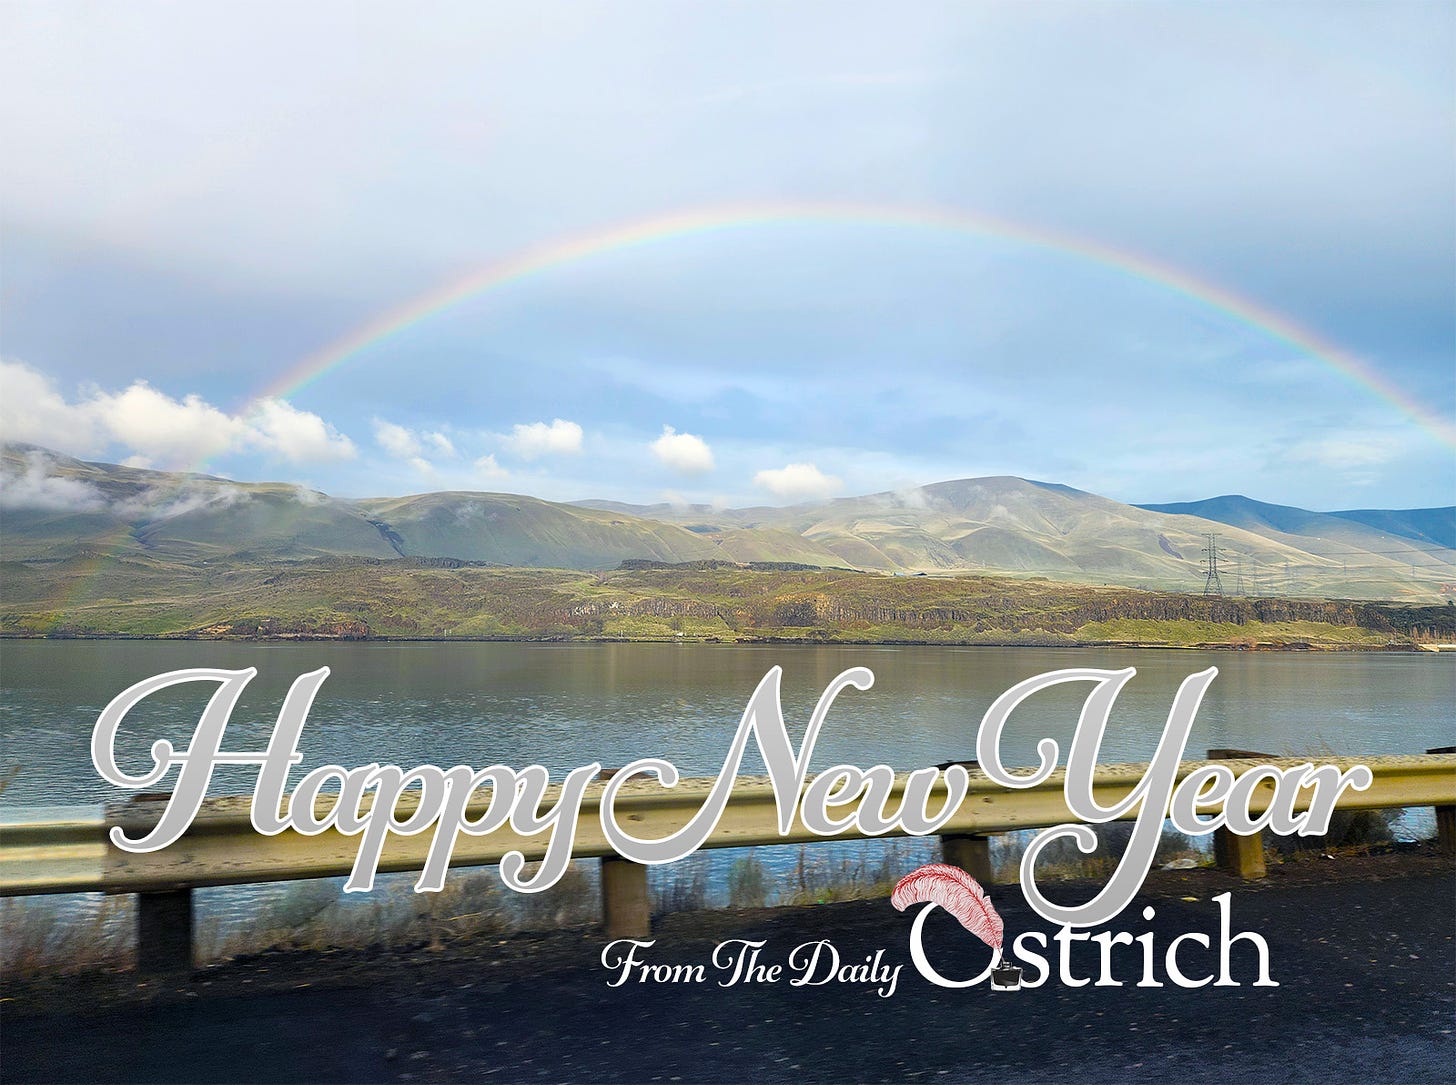 A rainbow over the Columbia, and text: Happy New Year from The Daily Ostrich